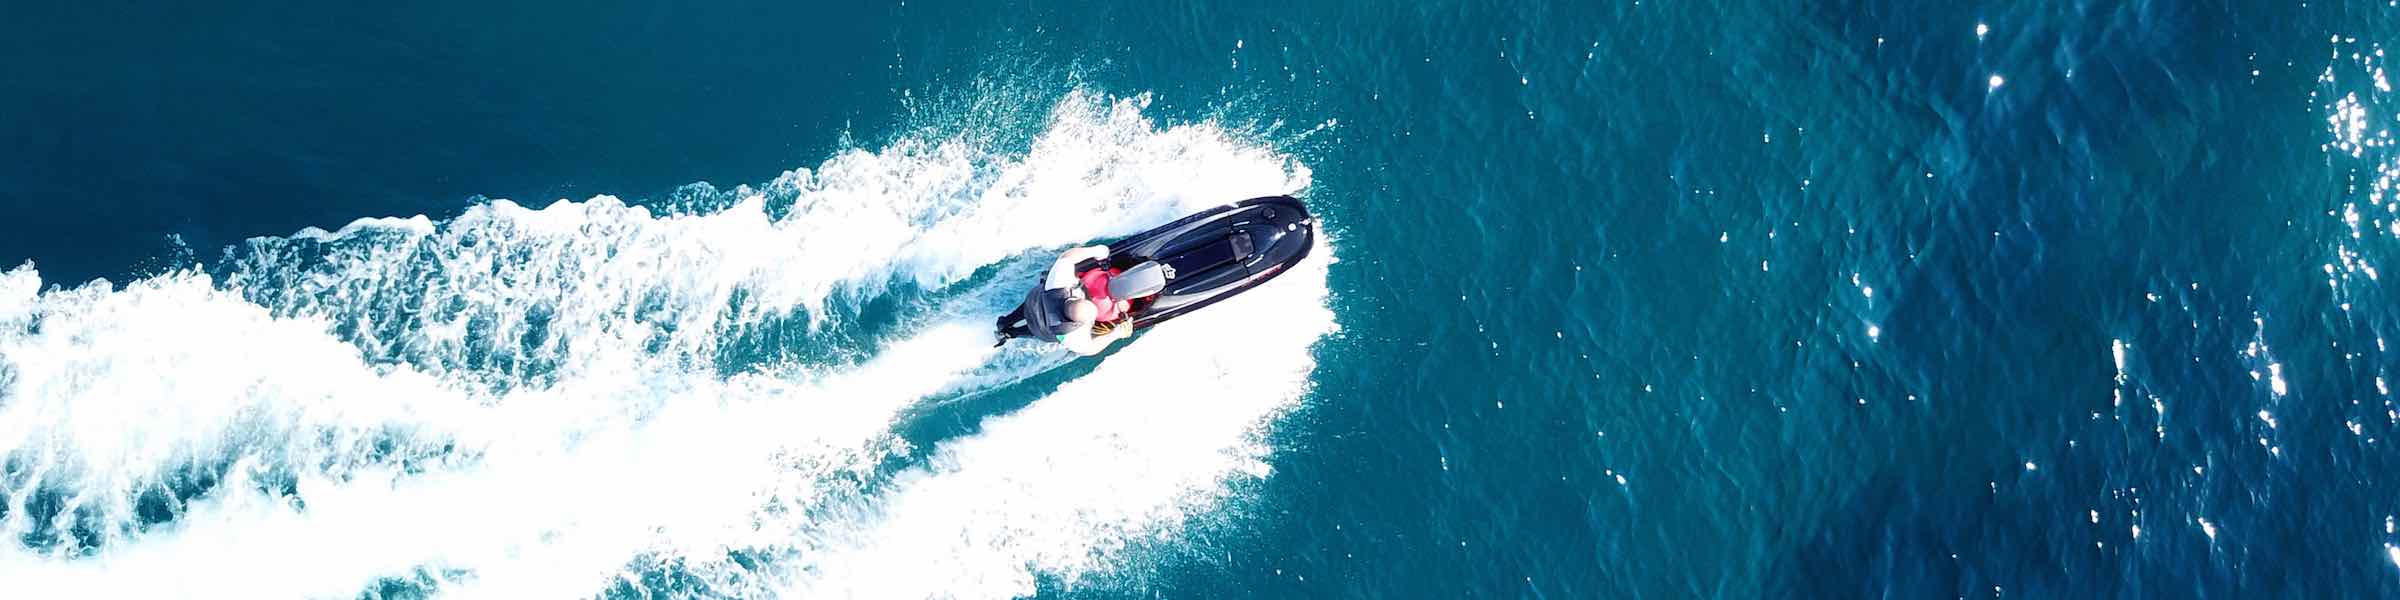 View from above of a person riding a jet ski.